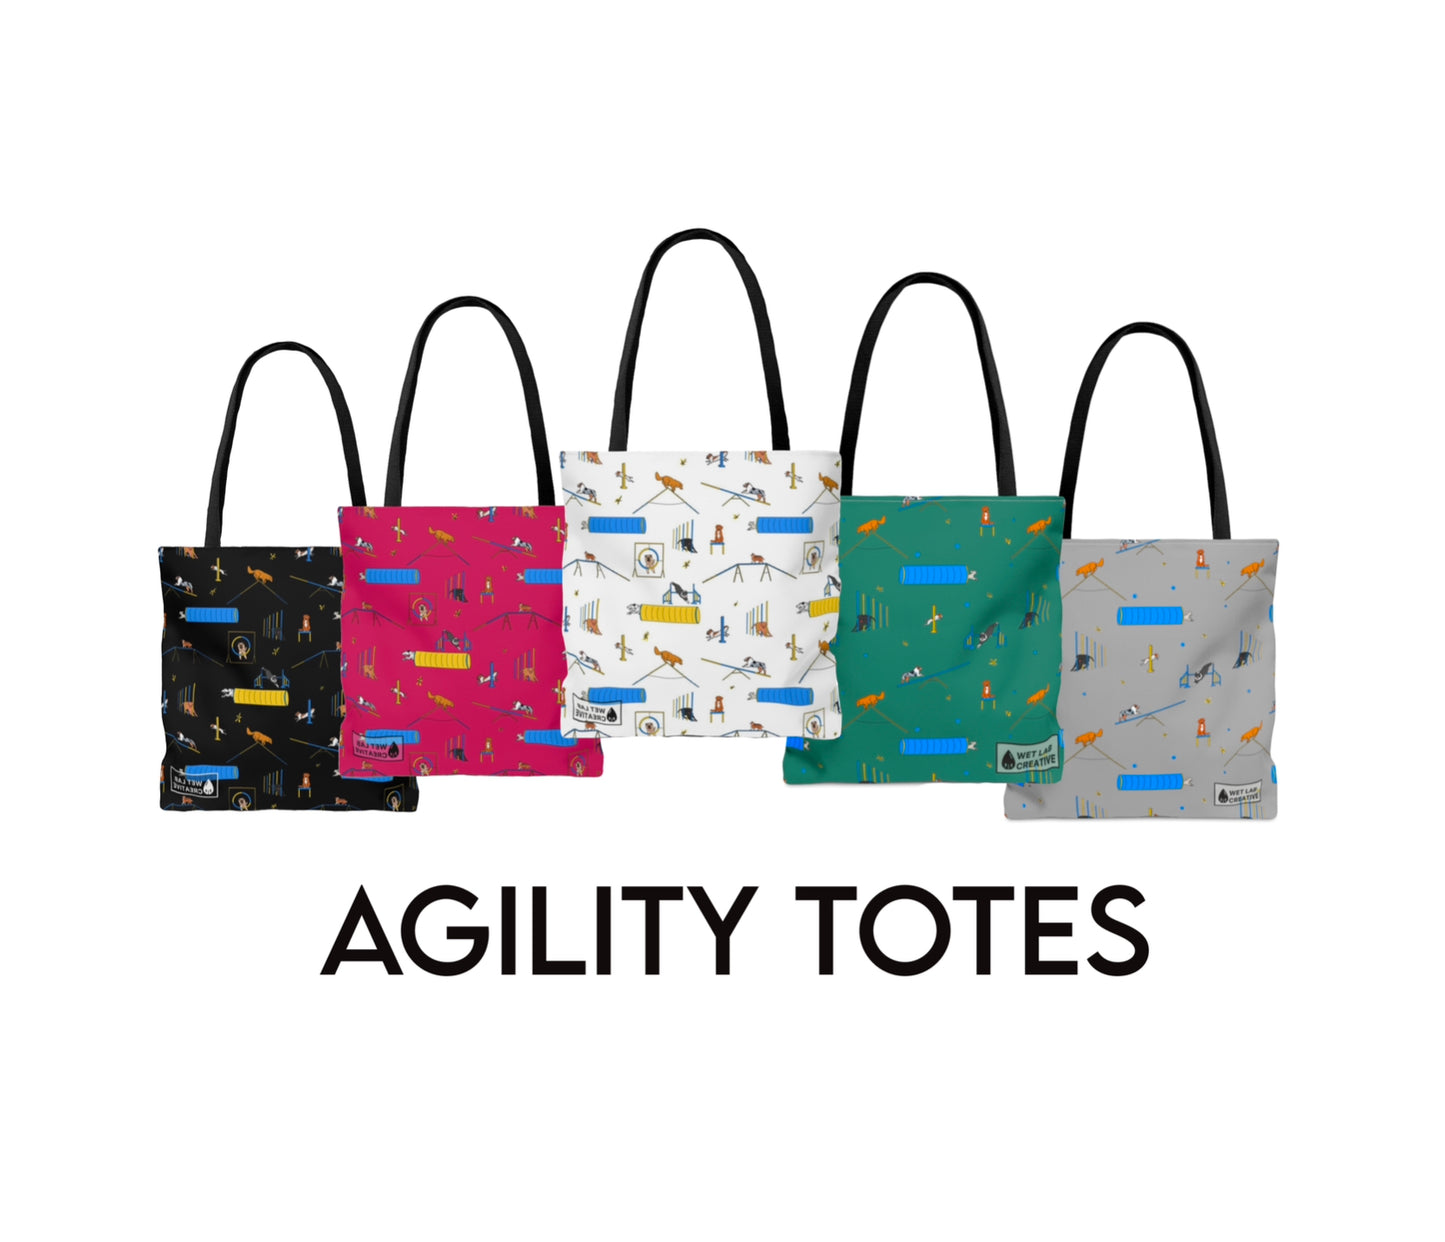 Agility Dog Pattern Tote Bag in Teal Pink Black White Charcoal